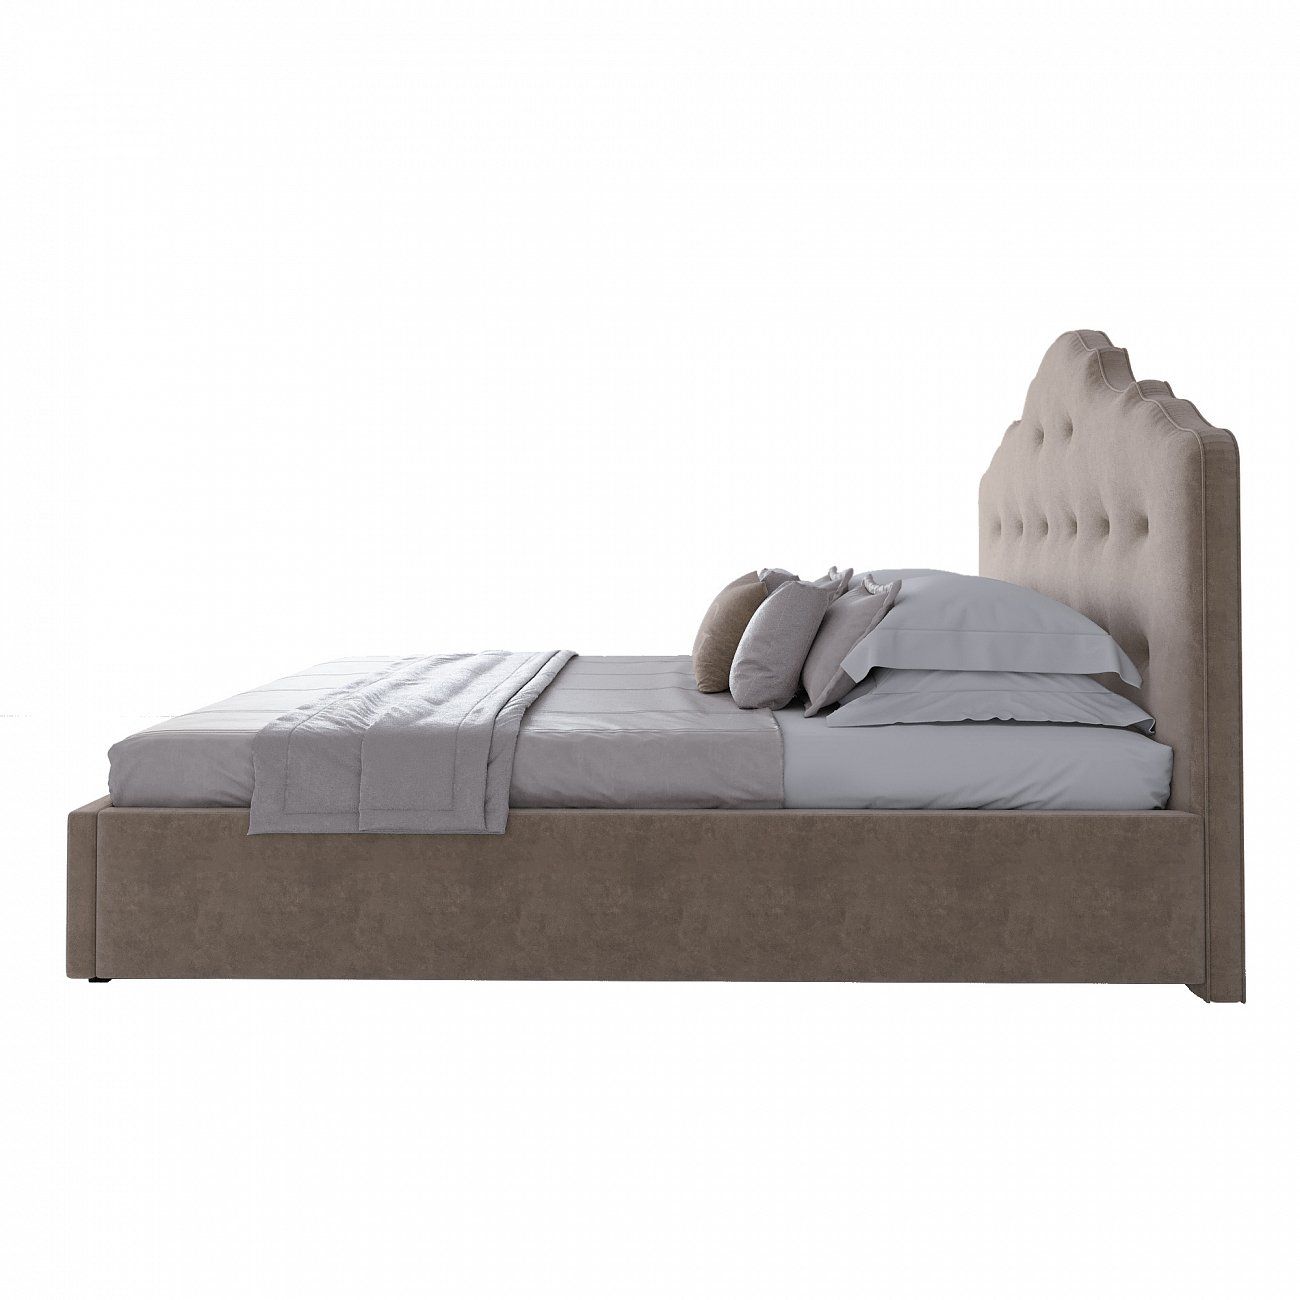 Double bed 180x200 beige Palace